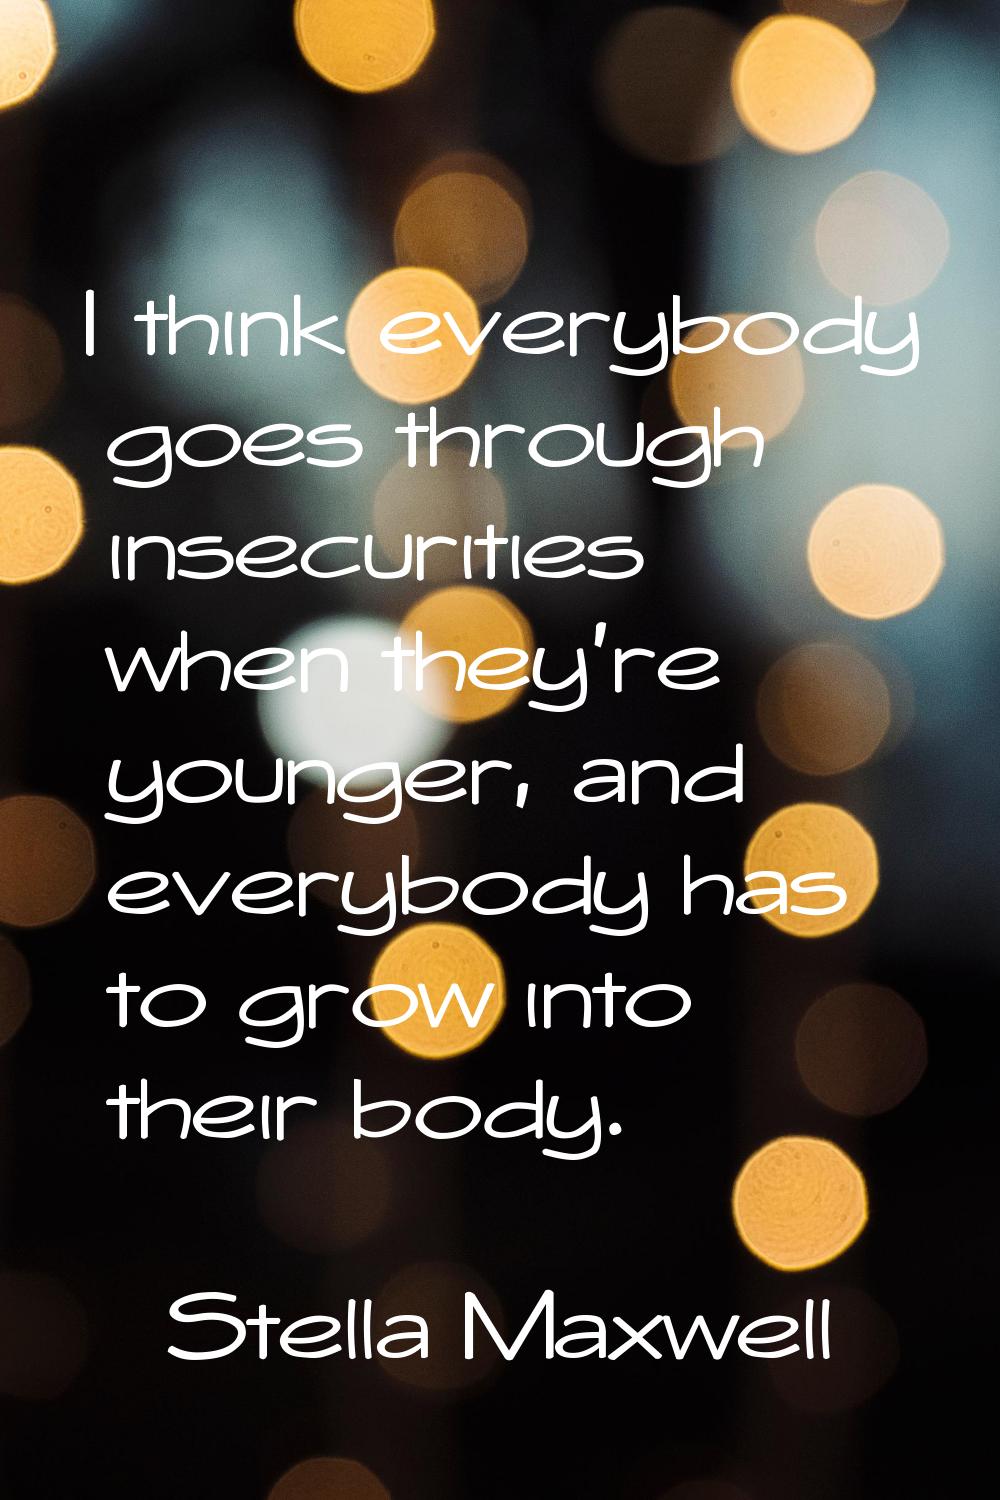 I think everybody goes through insecurities when they're younger, and everybody has to grow into th